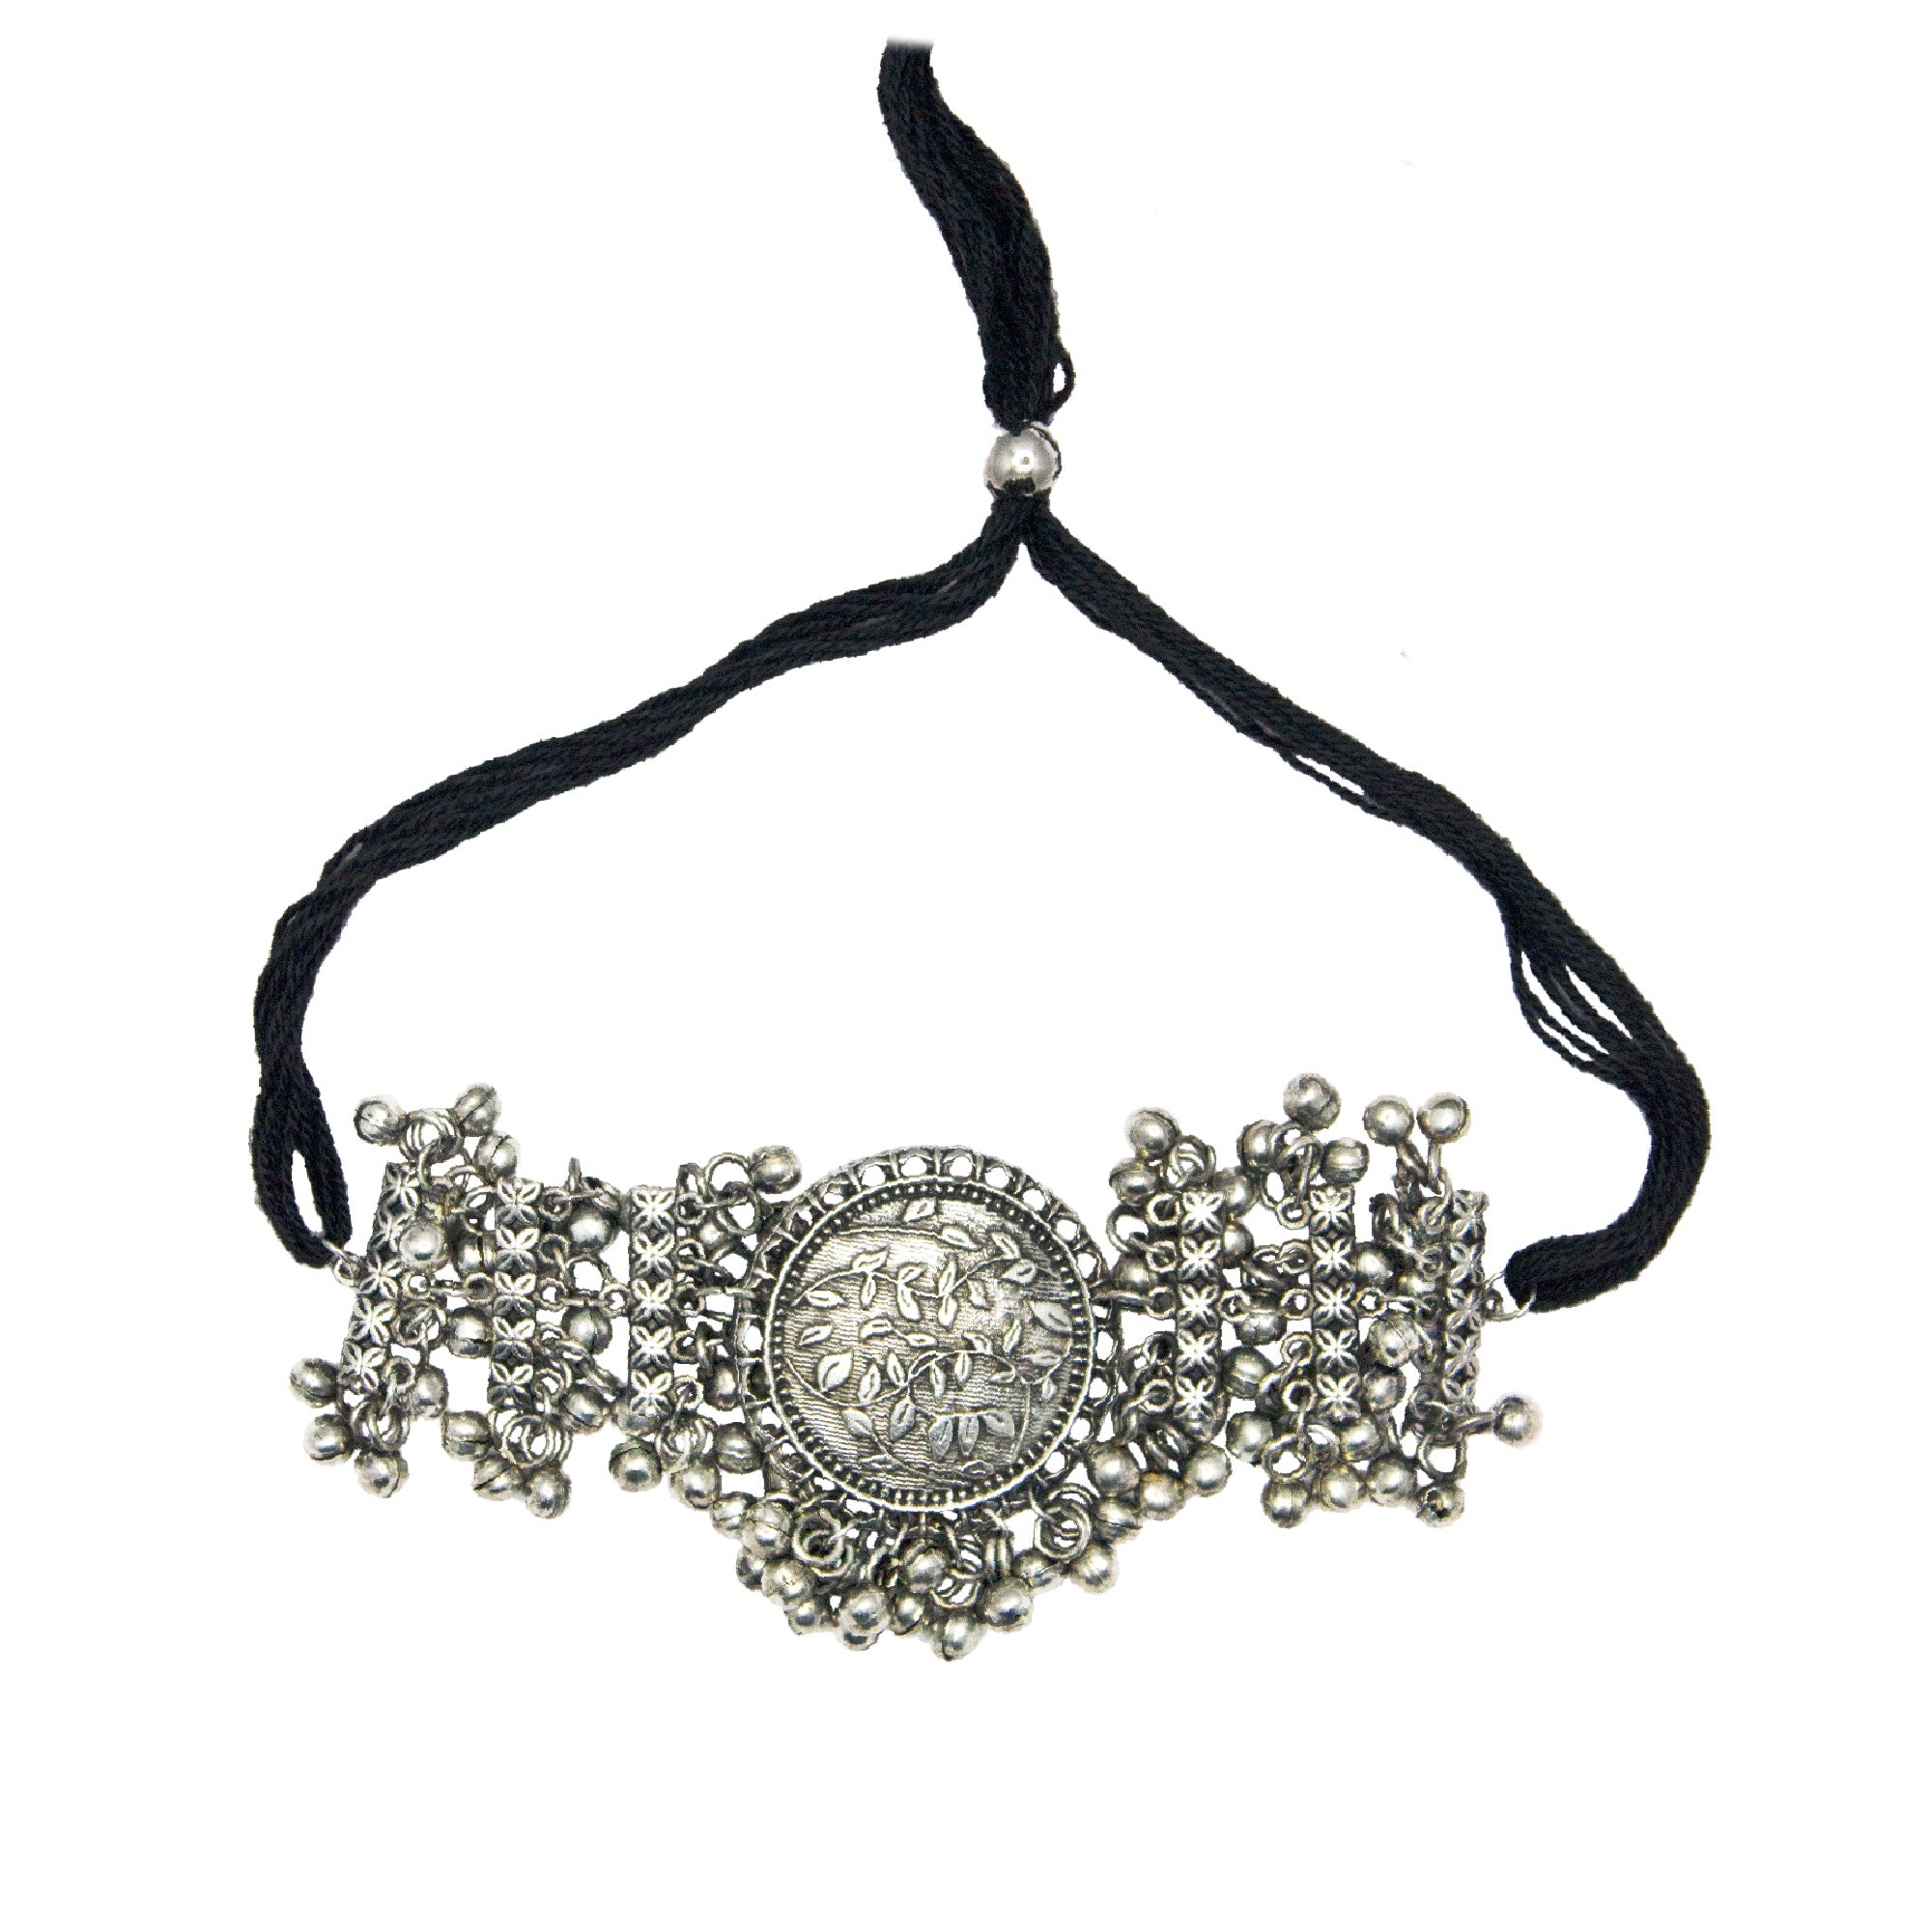 Abhinn Beautiful Silver Oxidised Floral Design With Ghungroo Choker For Women 